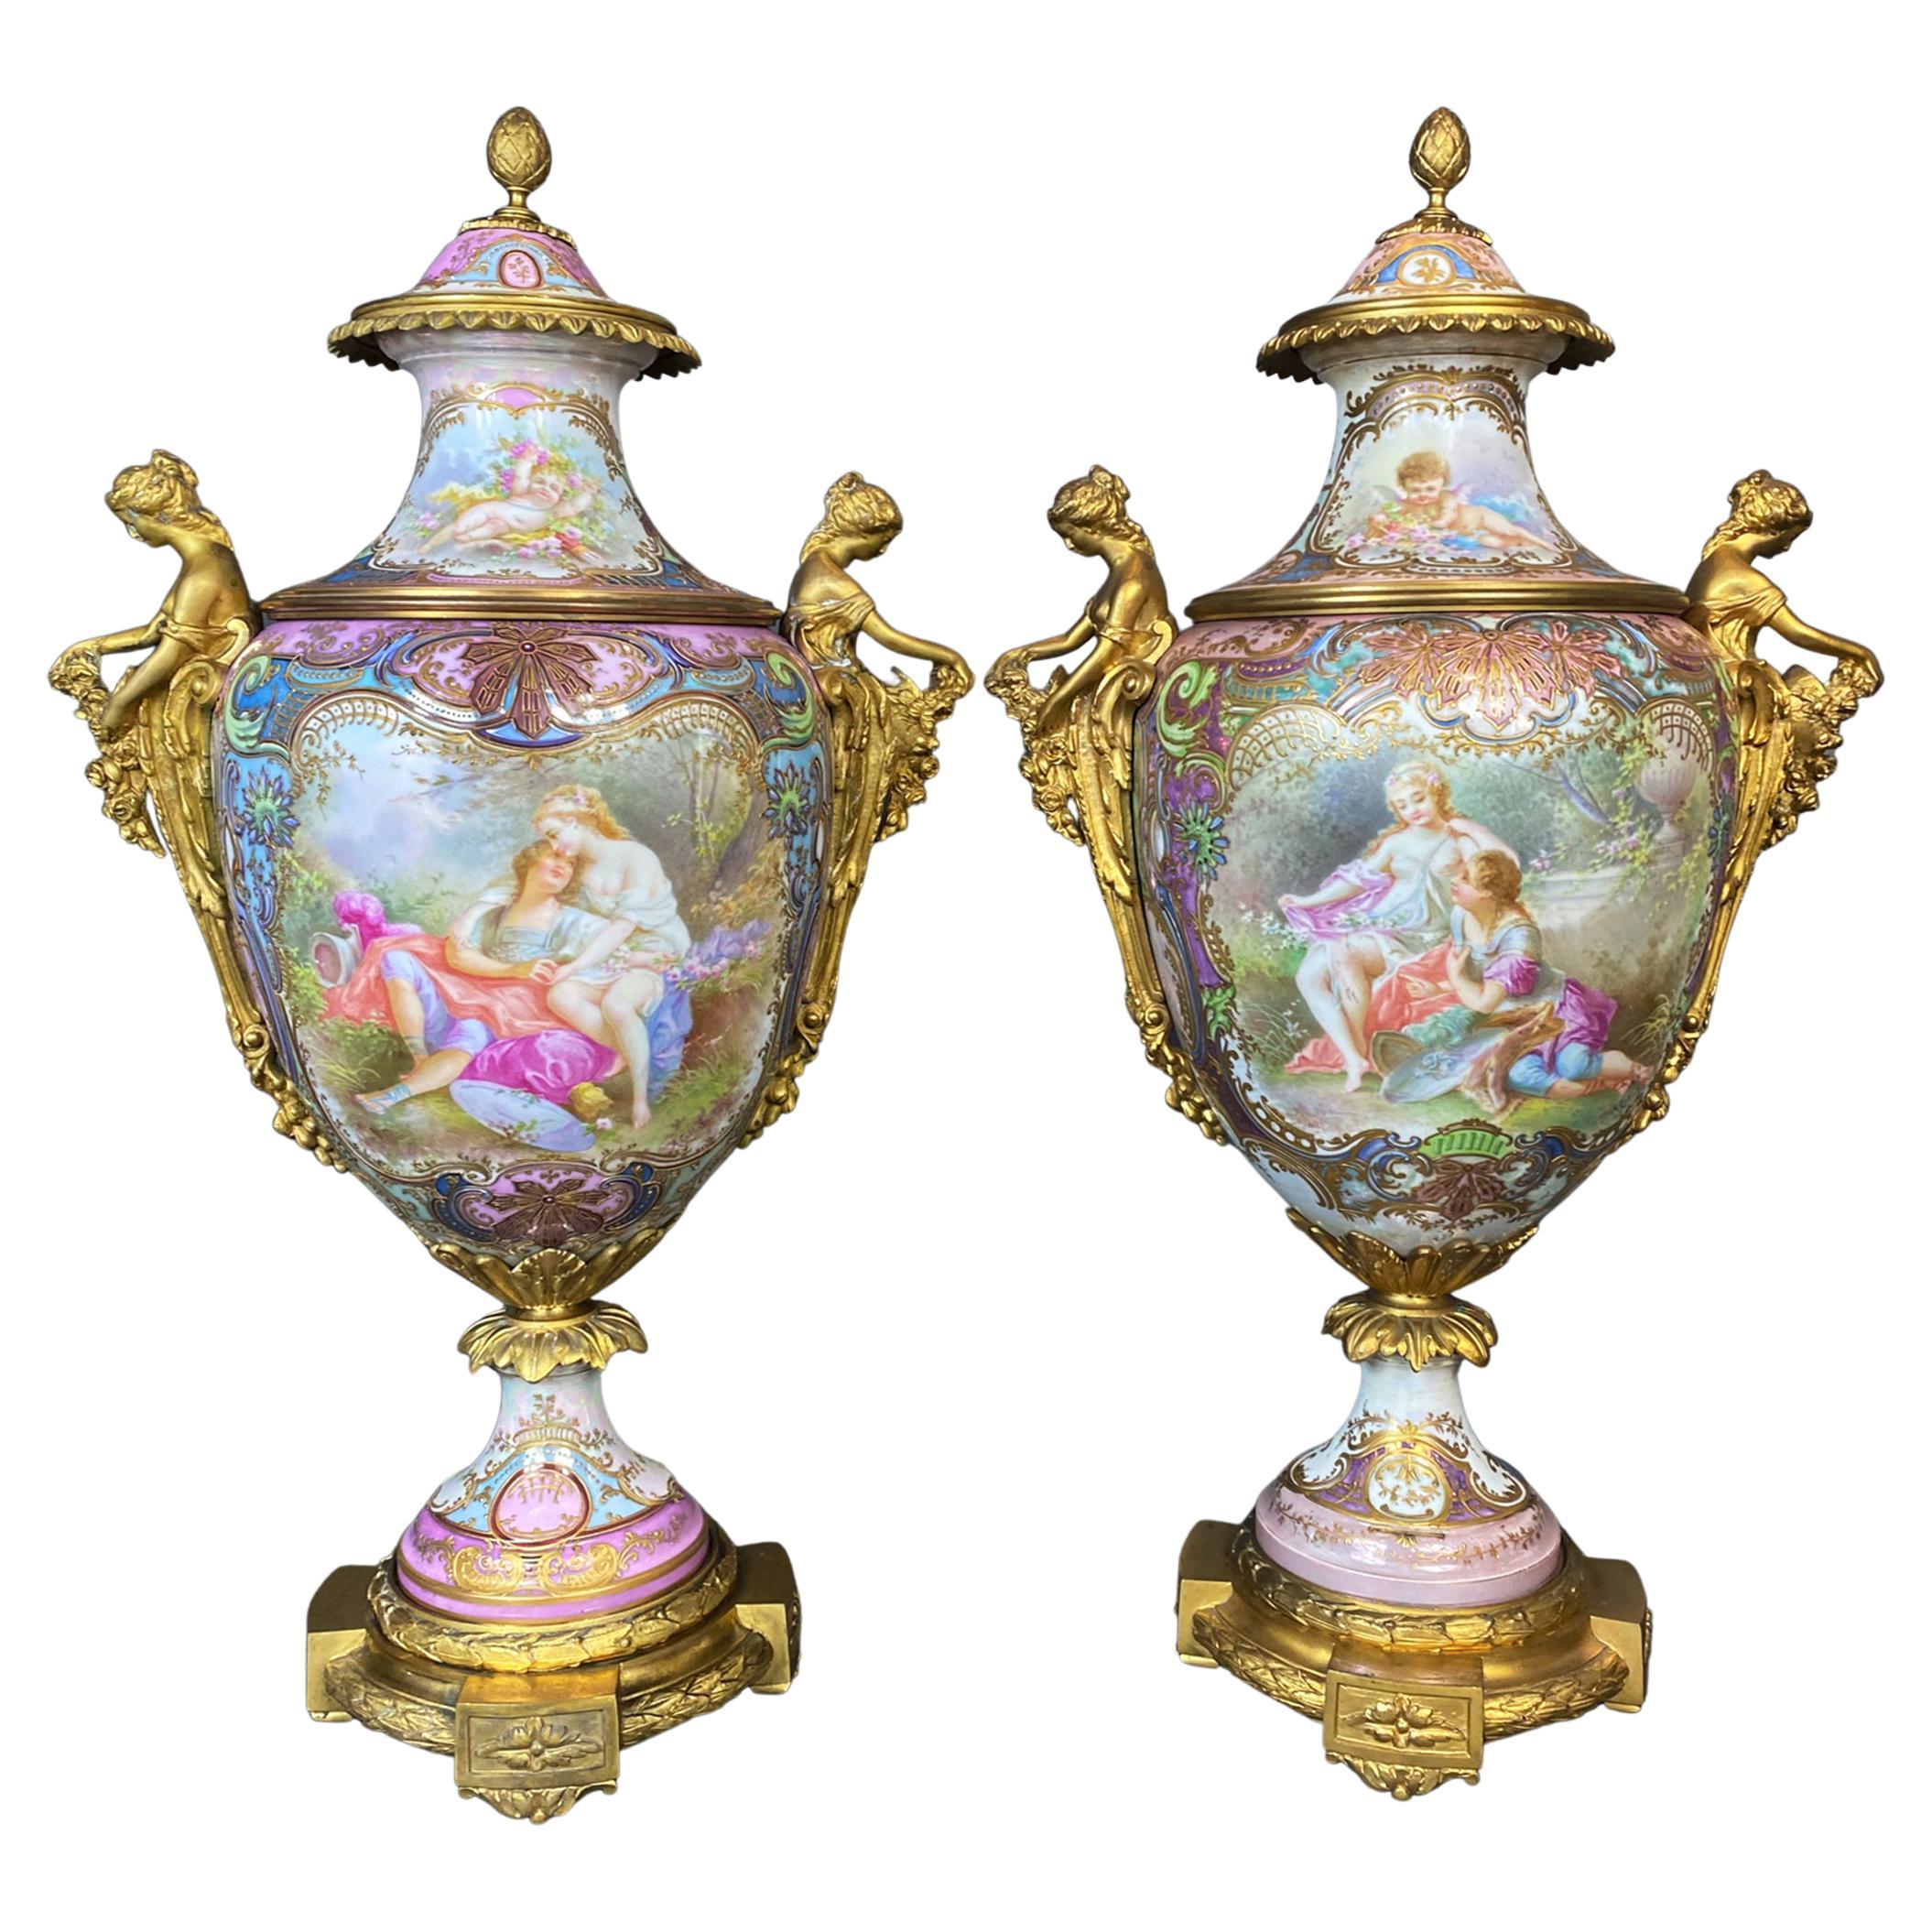 Pair of Ormolu-Mounted Sevres Style Vases with Garden Scene by A. Collot